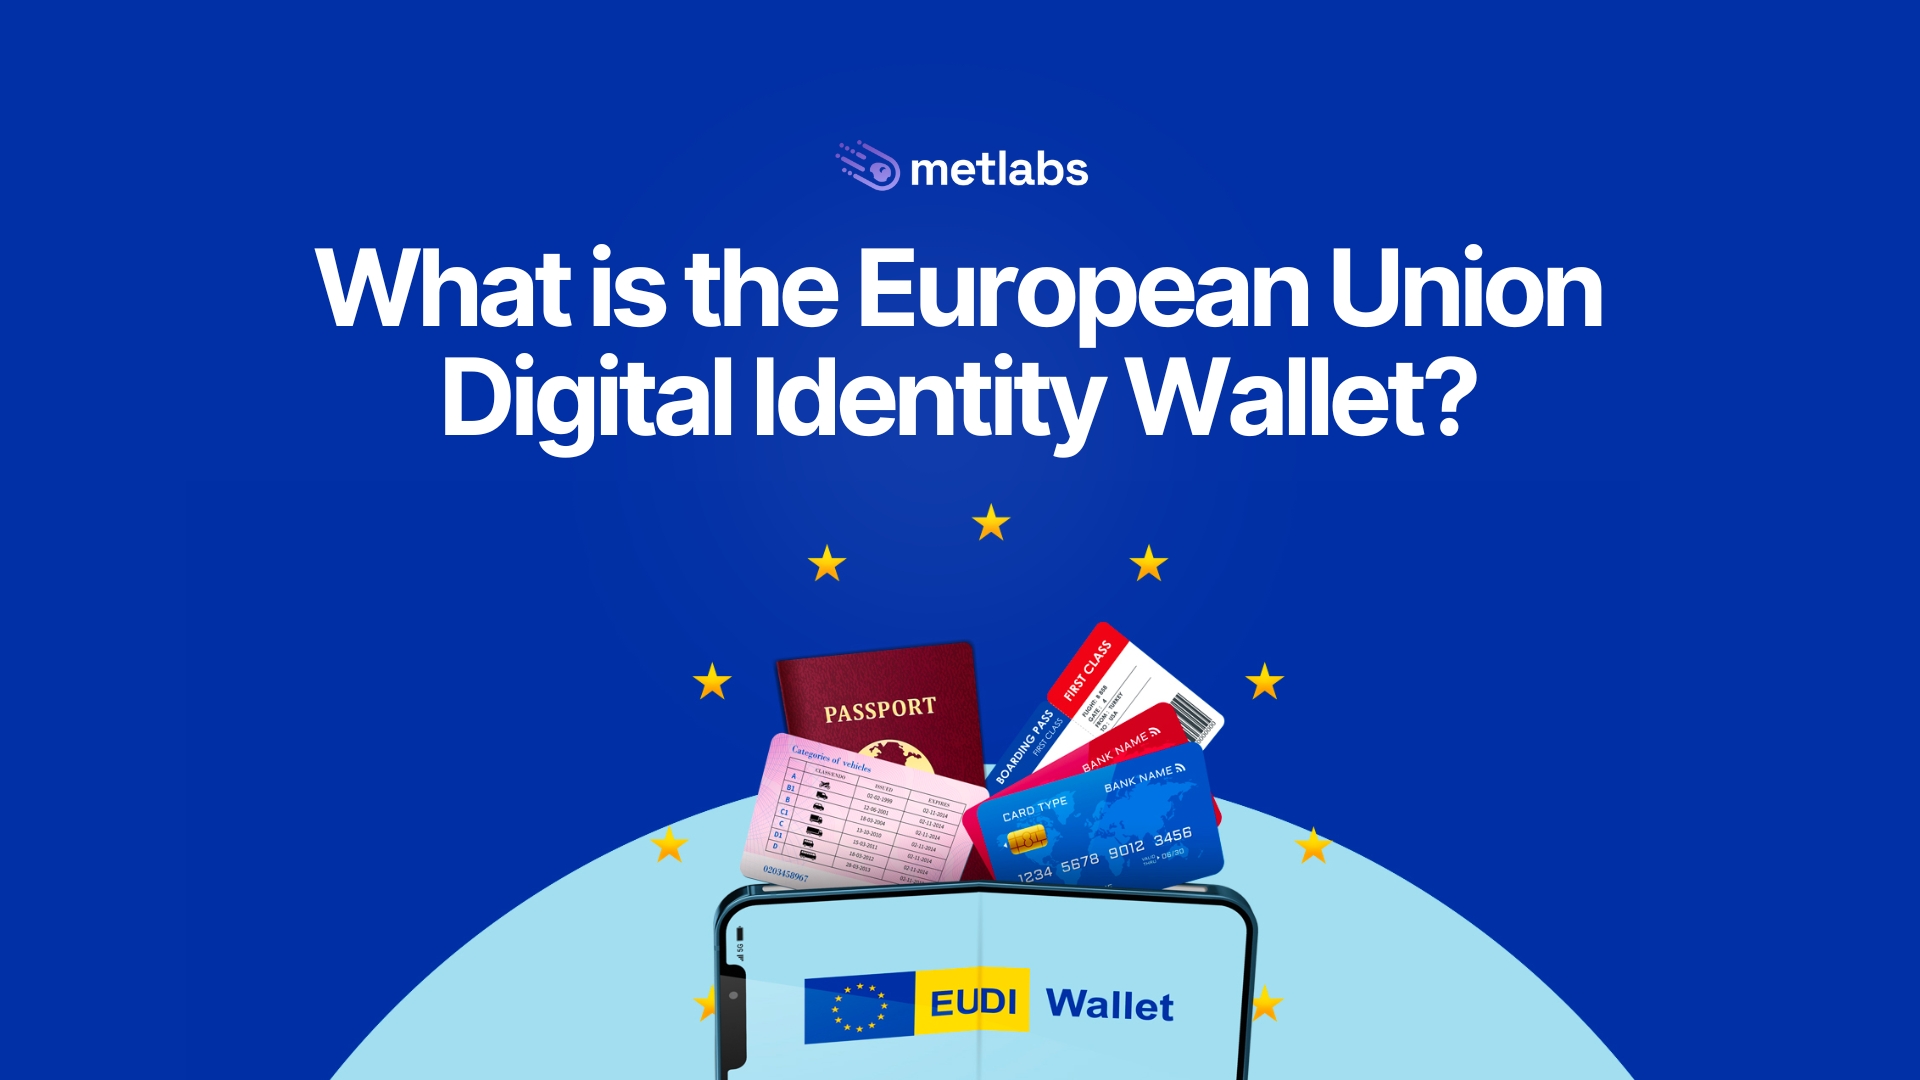 What is the European Union Digital Identity Wallet?